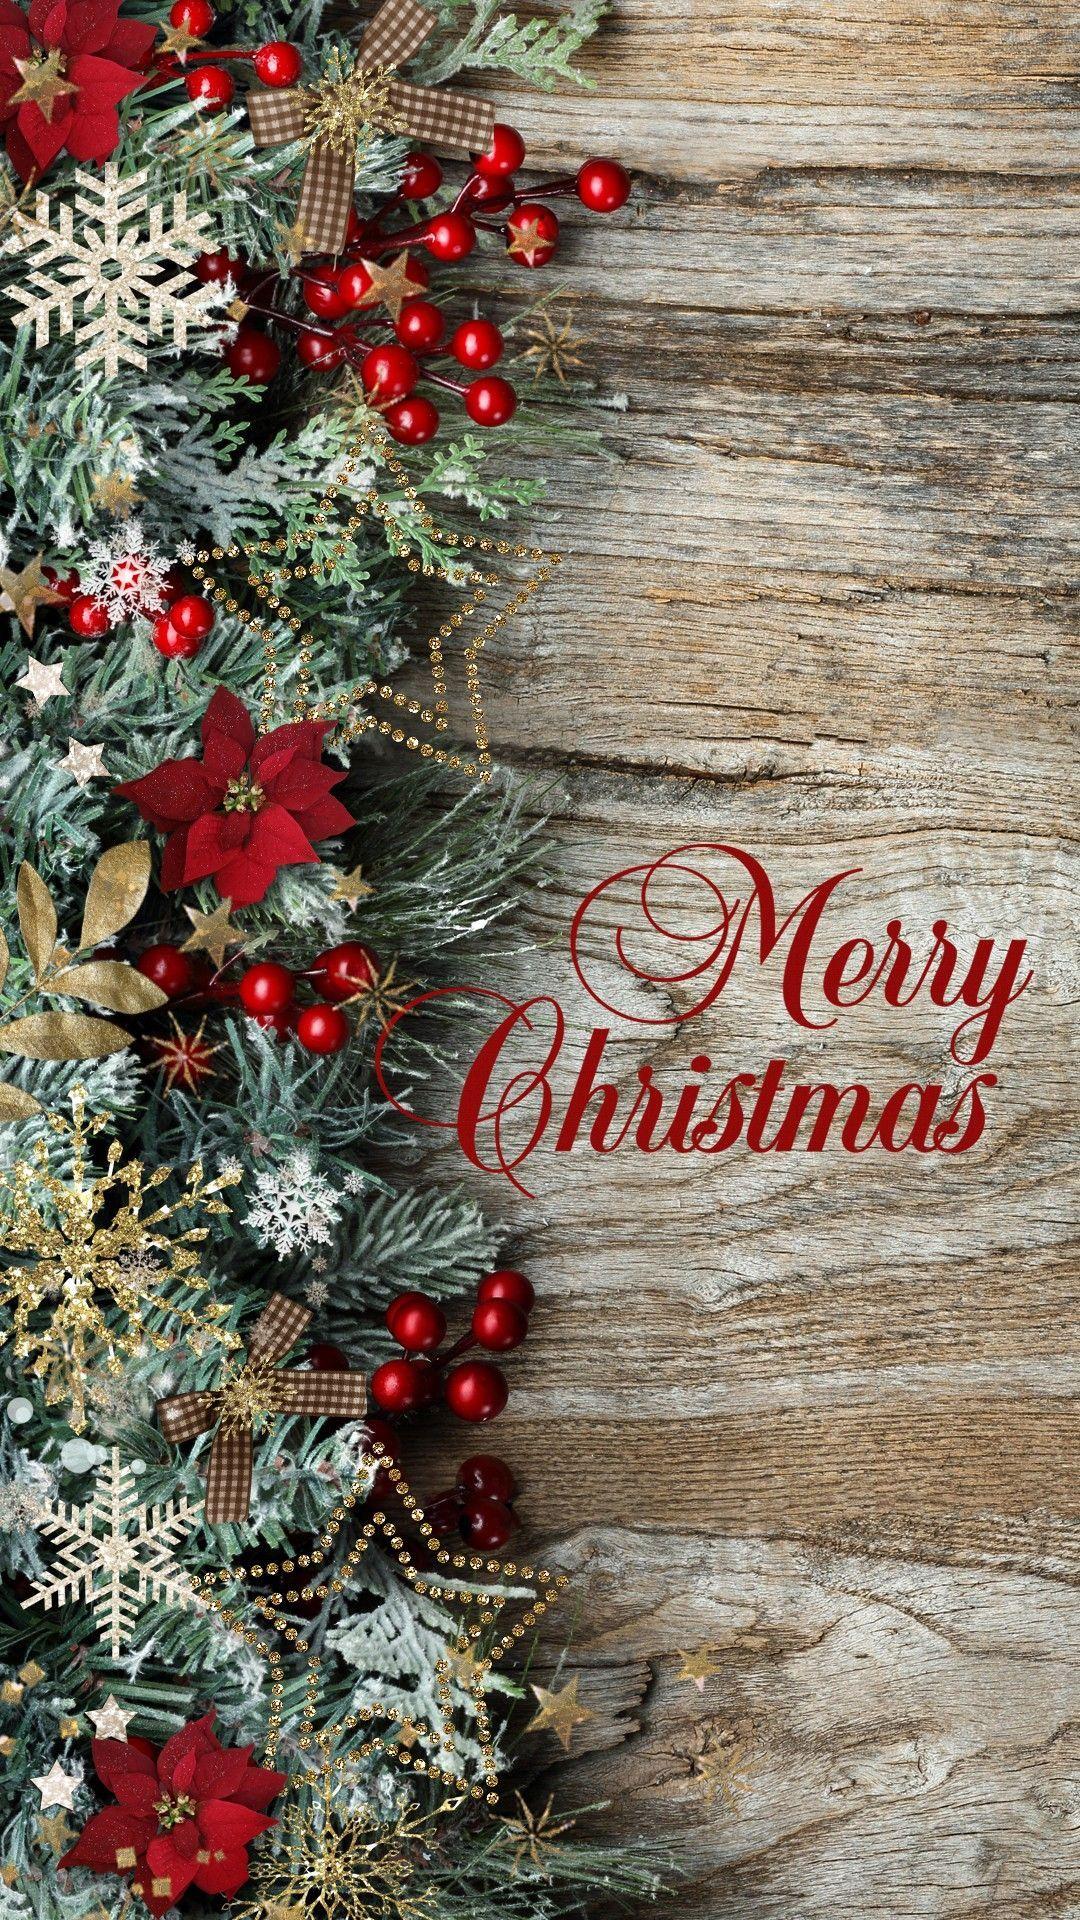 Merry Christmas Phone Wallpapers - Wallpaper Cave